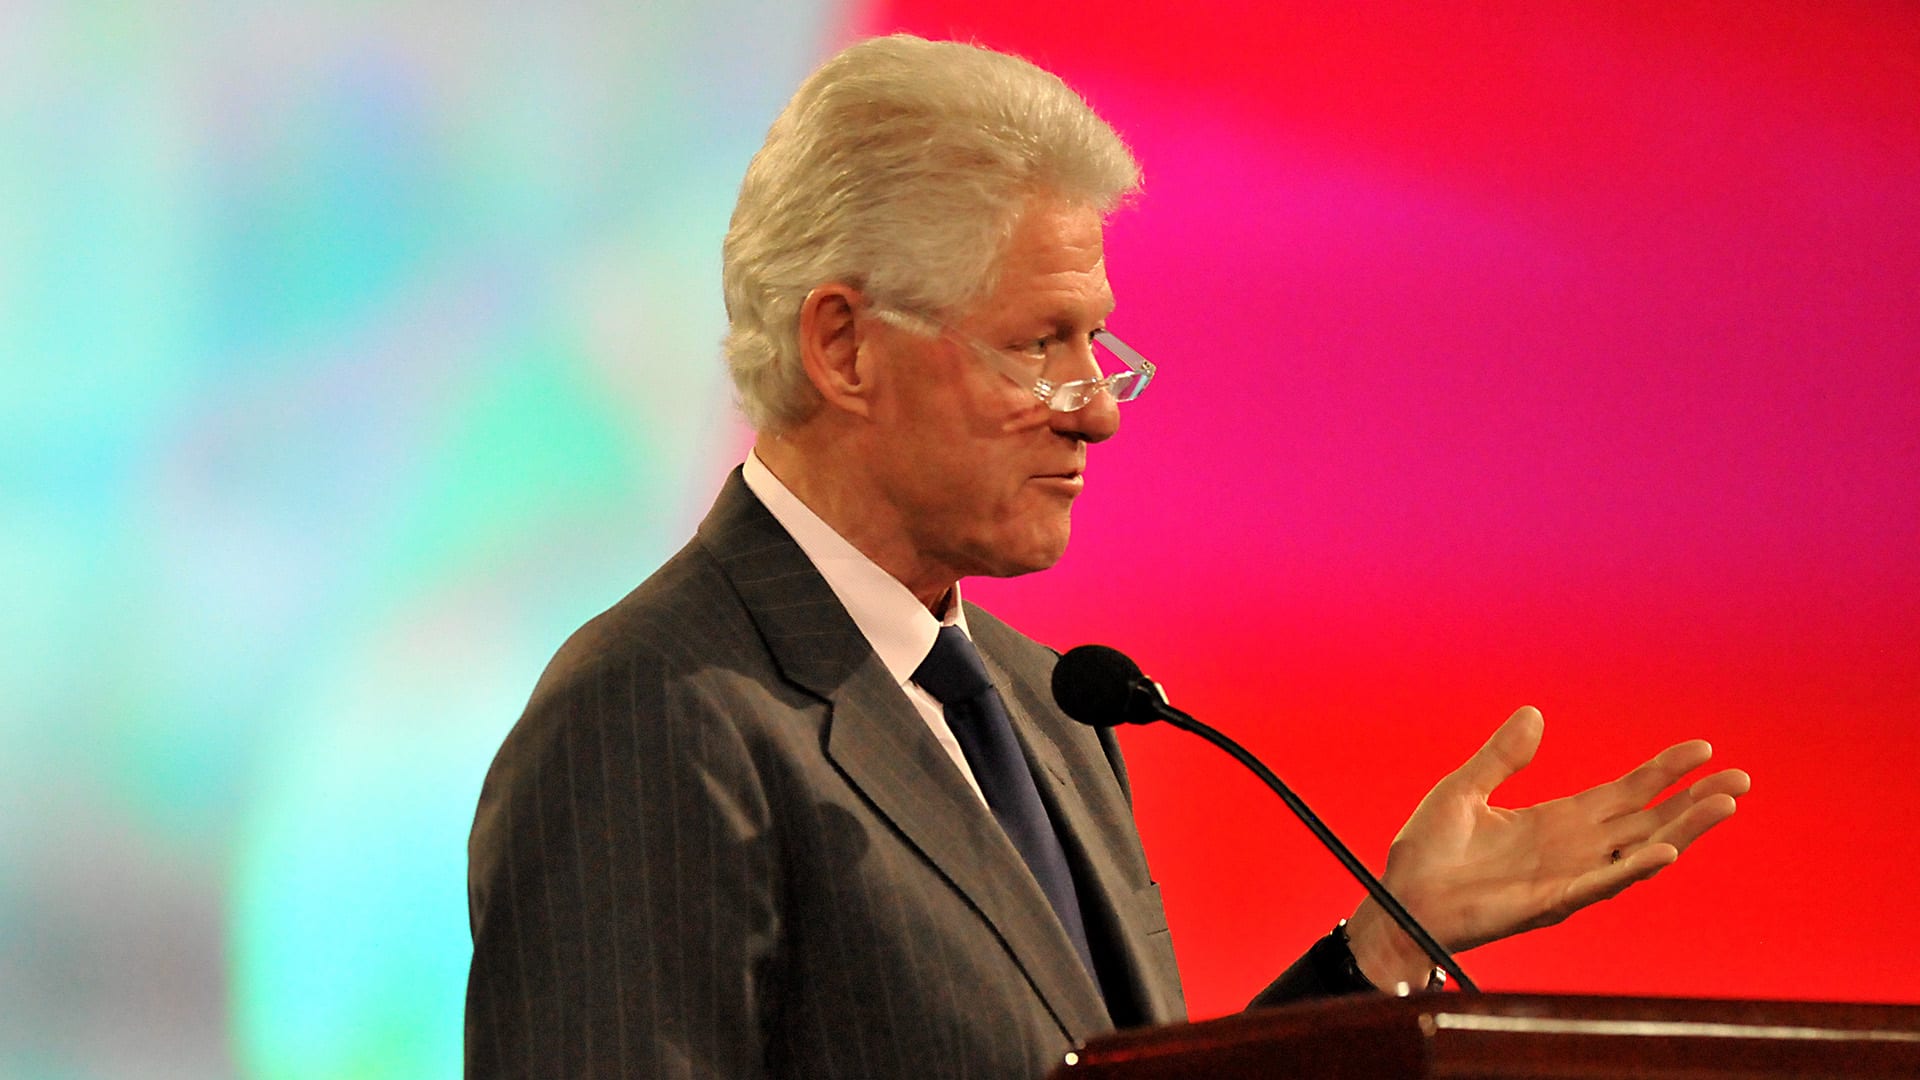 Bill Clinton corporate event booking agent